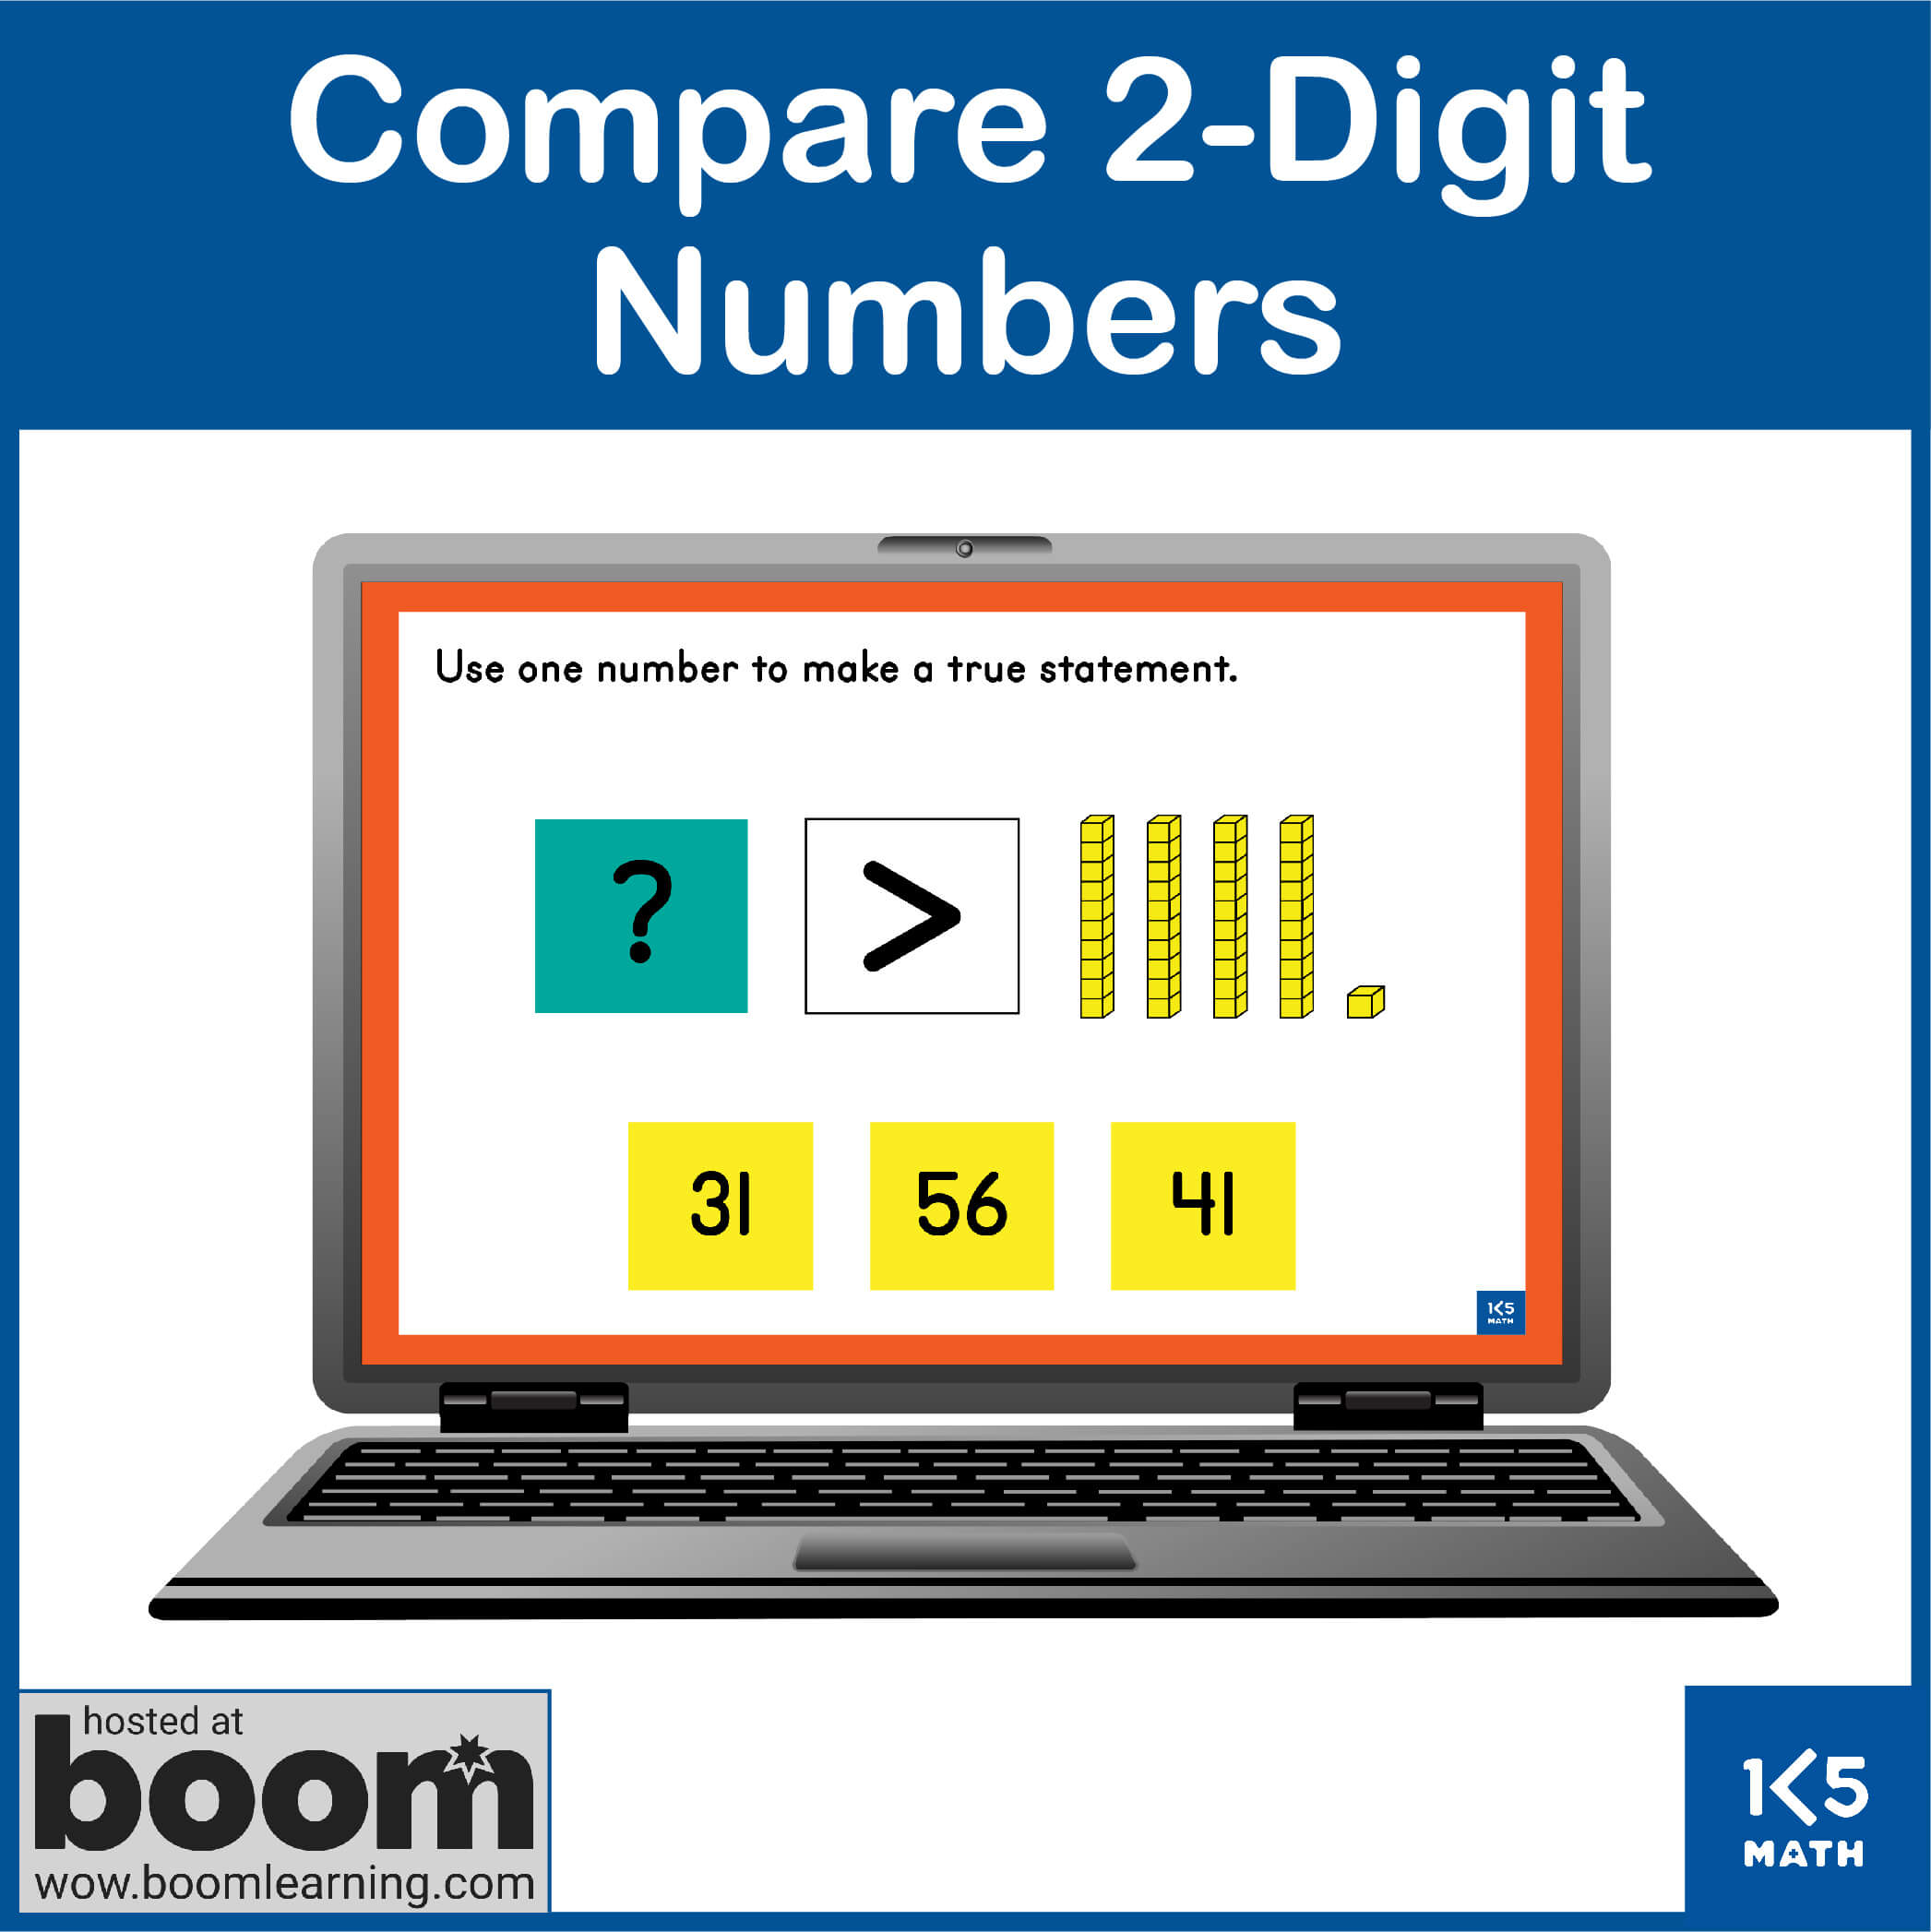 Boom Cards: Compare 2-Digit Numbers